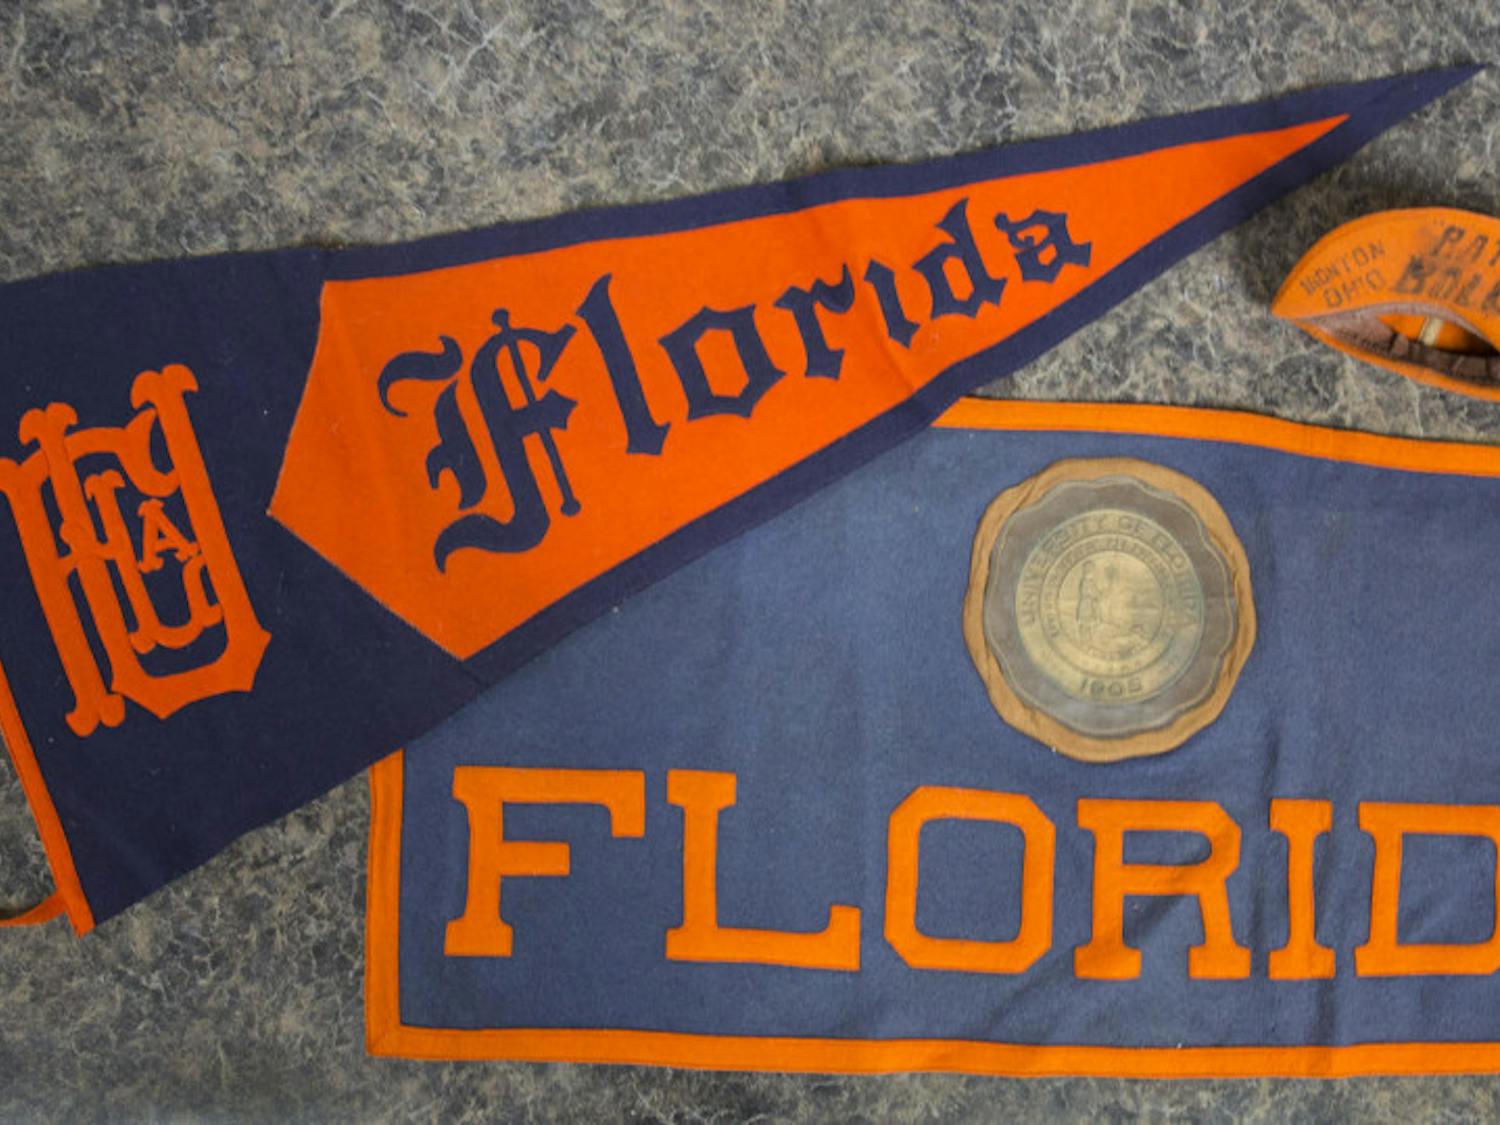 The University Archives at the George A. Smathers Libraries received a triangular pennant, a rectangular banner and a “rat cap” from the 1930s as a donation. They are among the oldest items in the university’s collection.&nbsp;